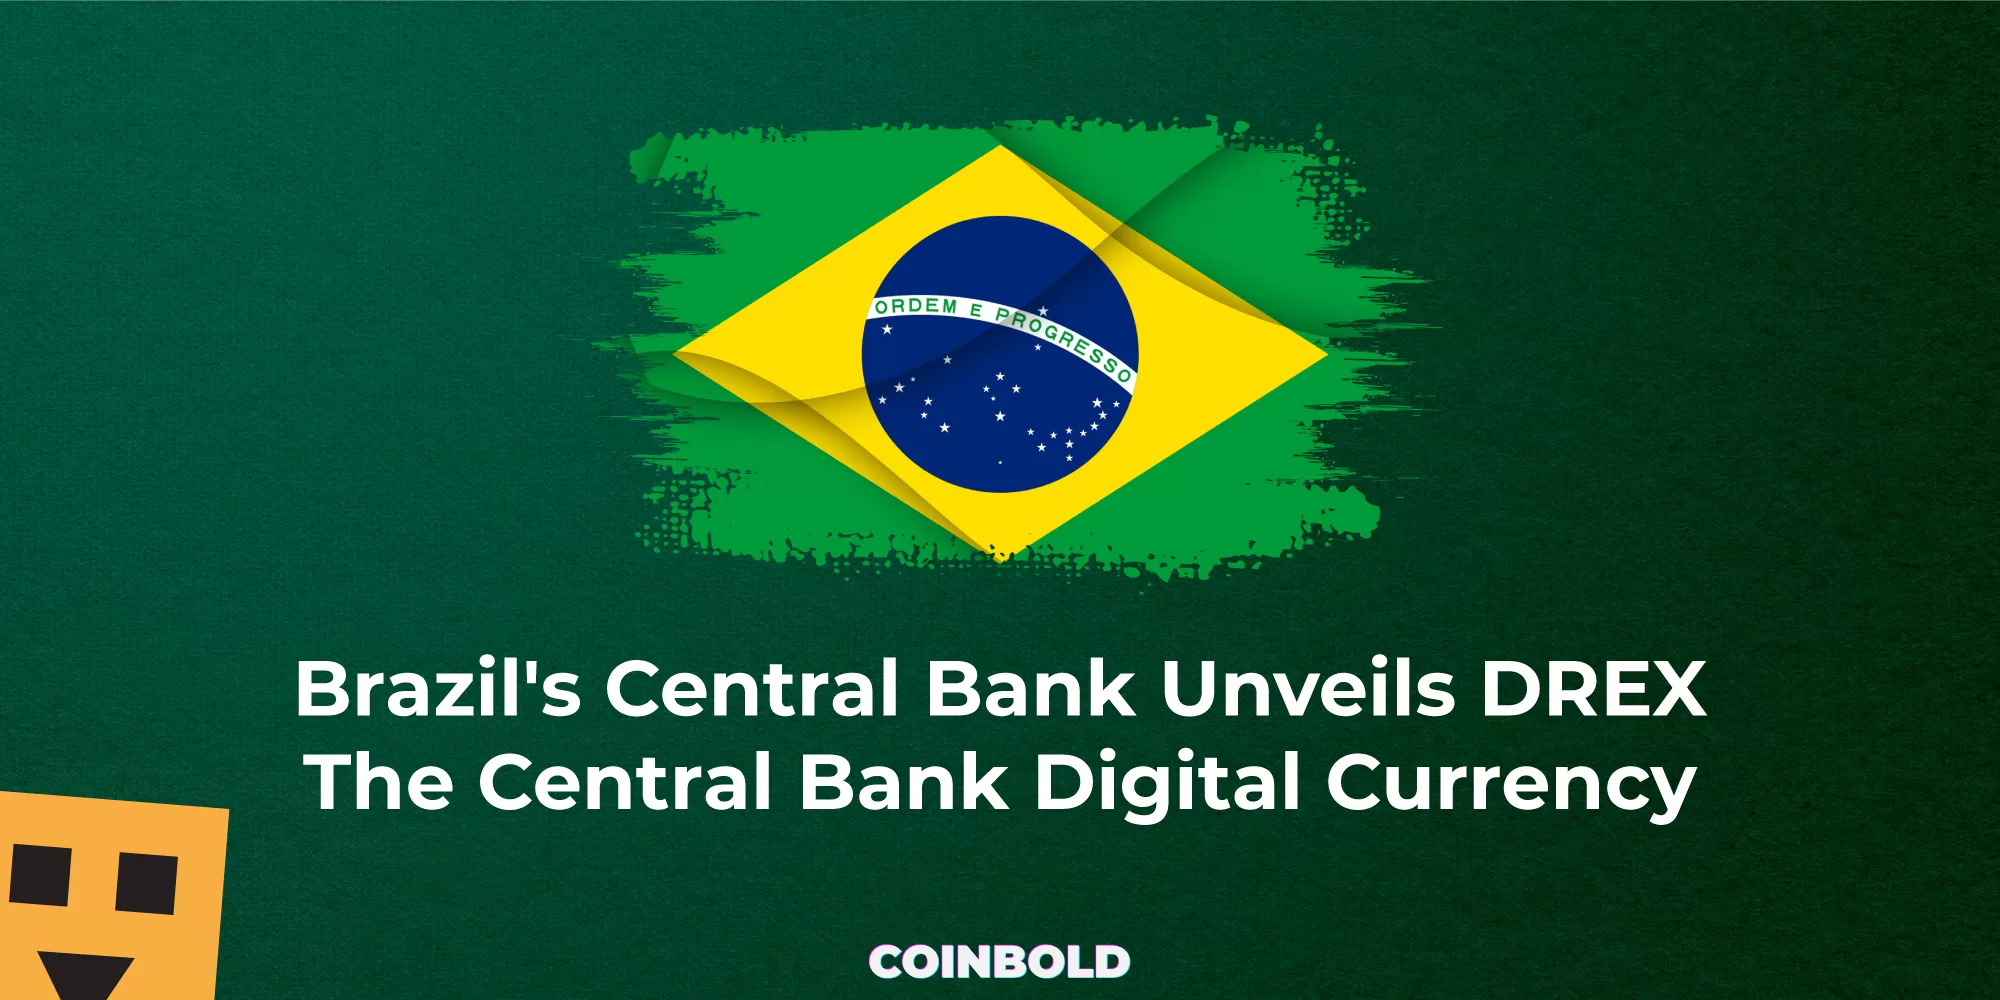 Brazil's Central Bank Unveils DREX The Central Bank Digital Currency